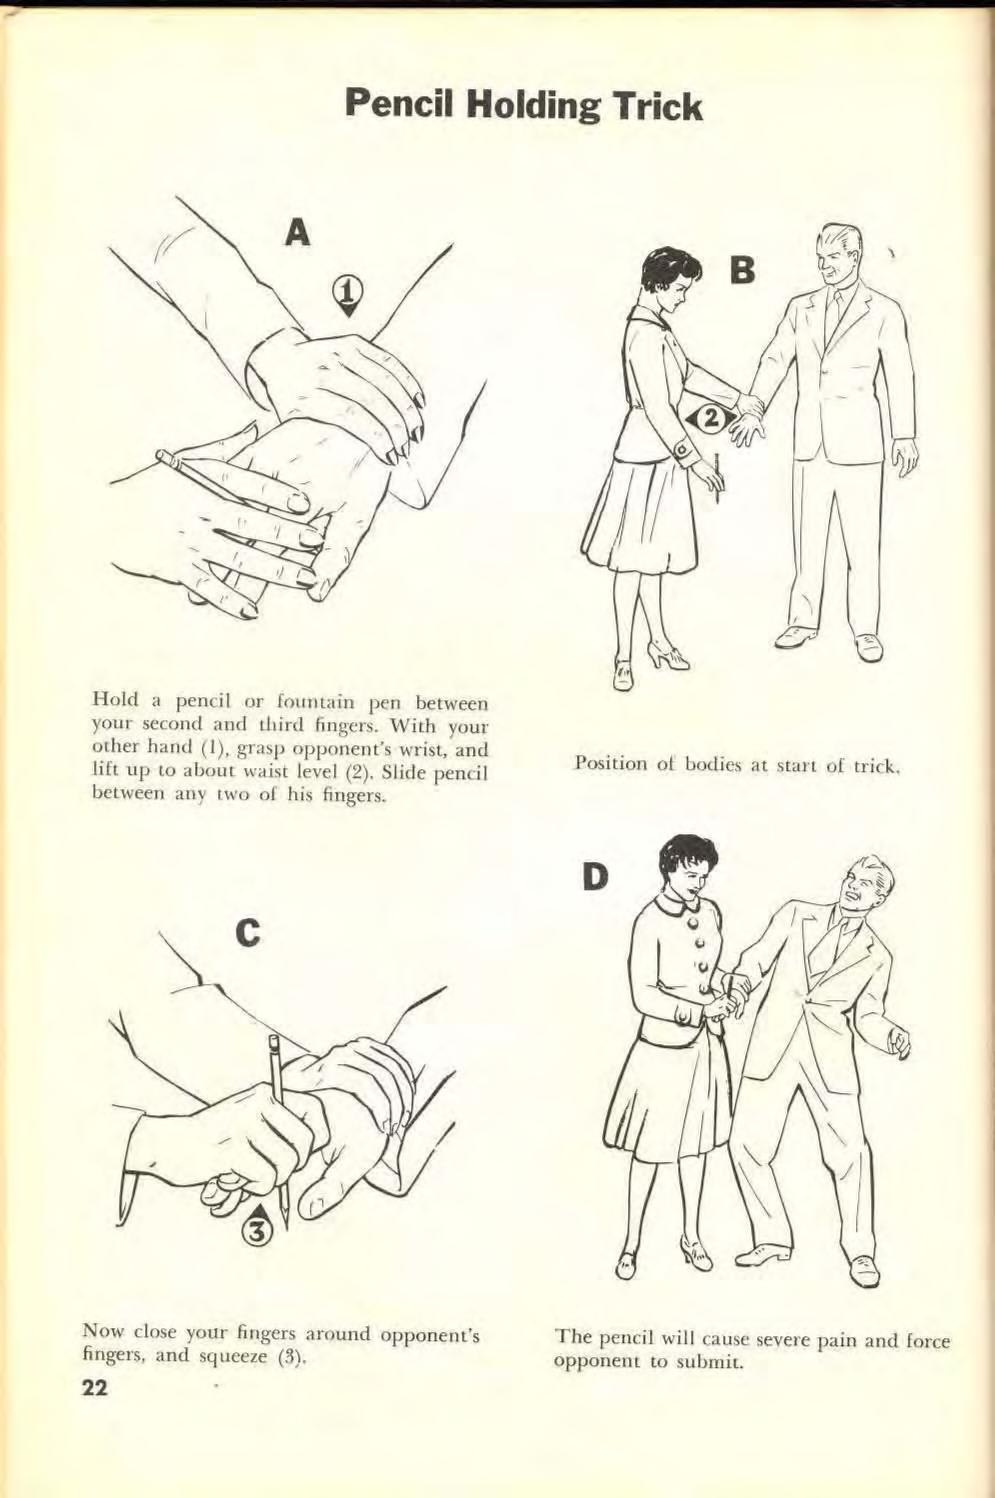 How to break a dude's fingers with a pencil (from an old ladies self defense manual)